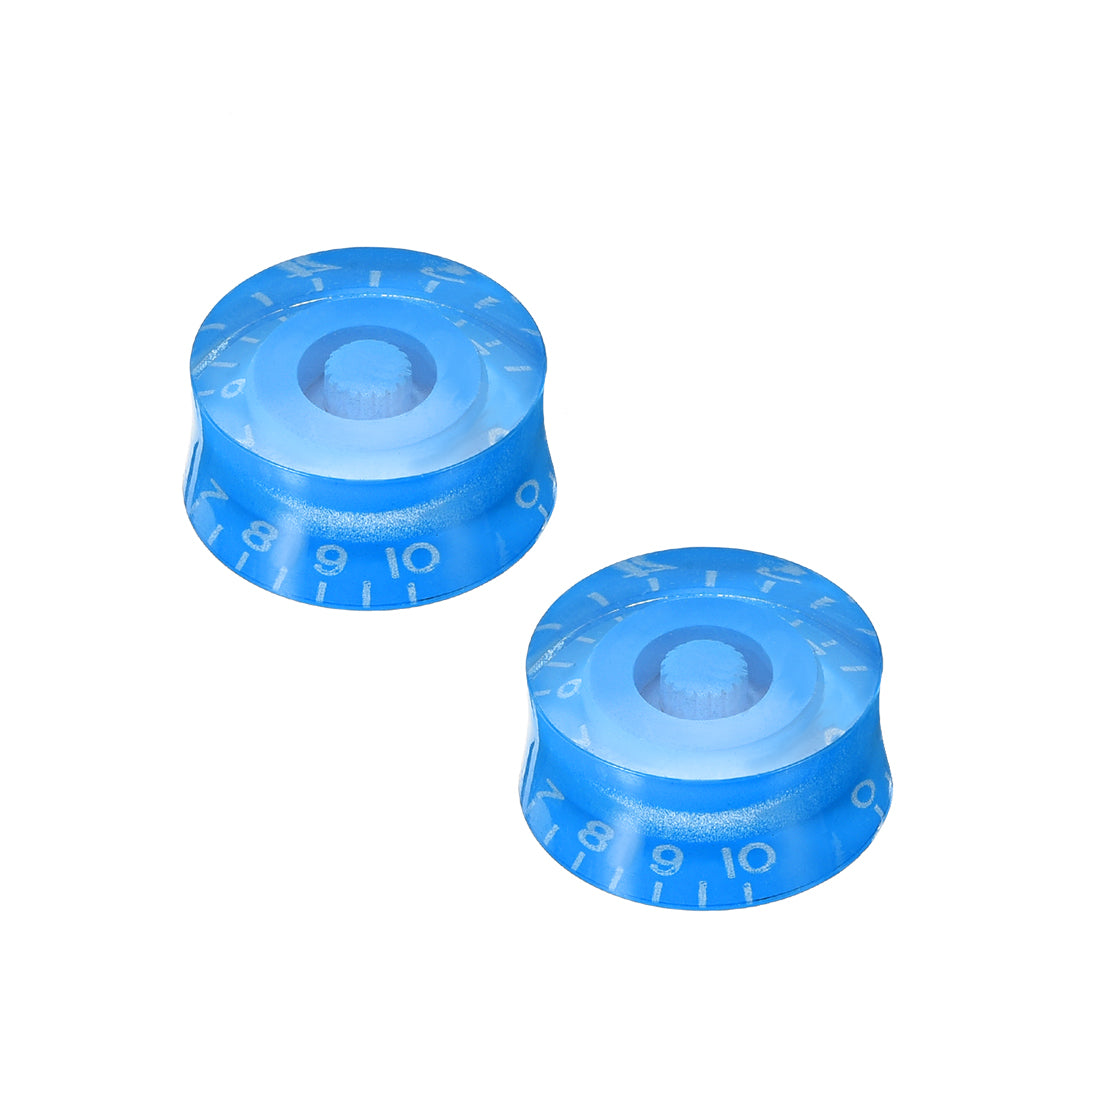 Uxcell Uxcell 2pcs Red 6mm Potentiometer Control Knobs For LP Electric Guitar Acrylic Volume Tone Knobs Pail Shape